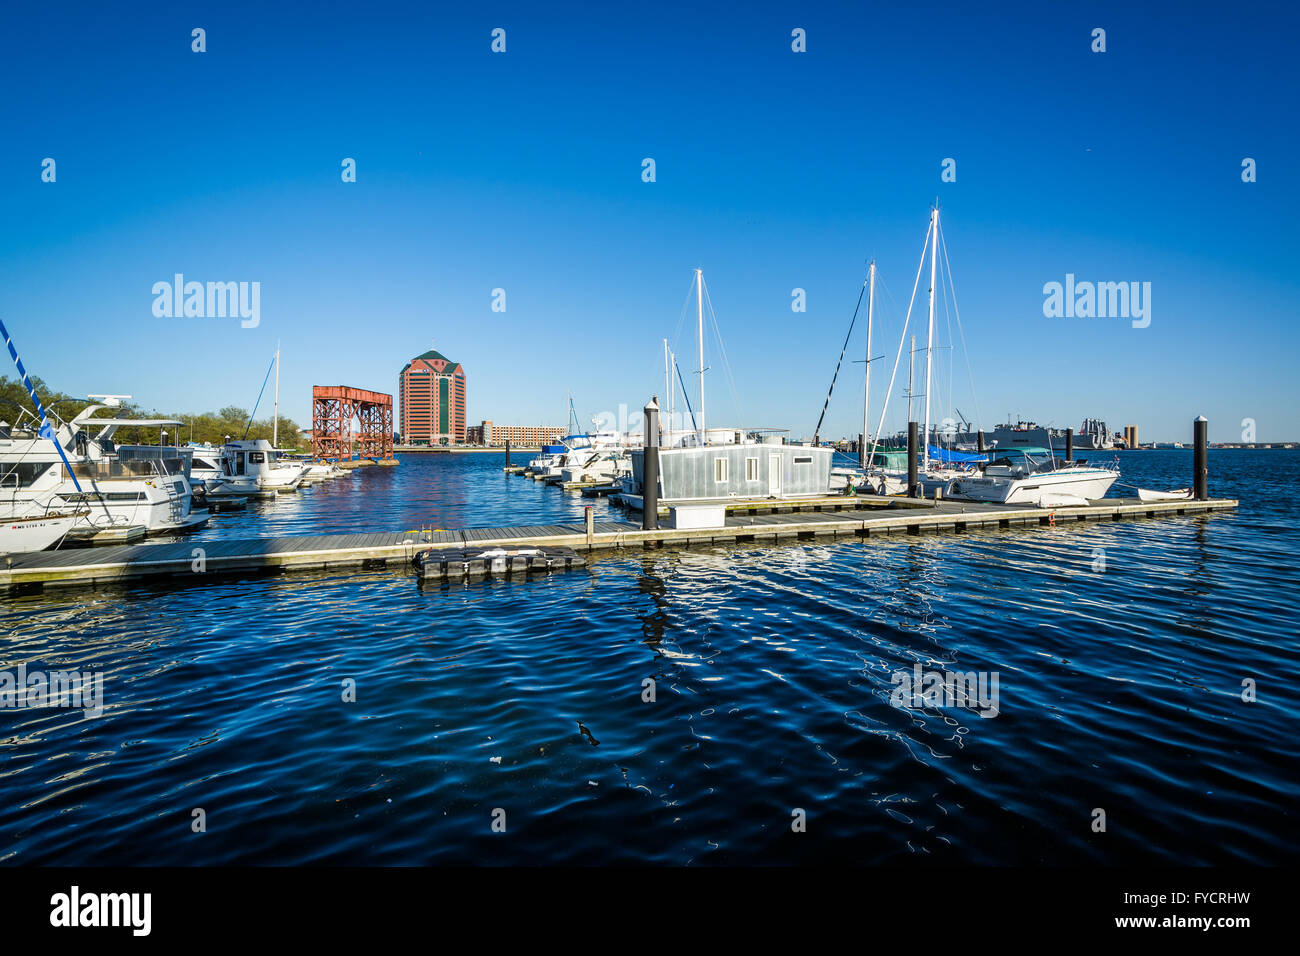 Boats and docks in Canton, Baltimore, Maryland. Stock Photo